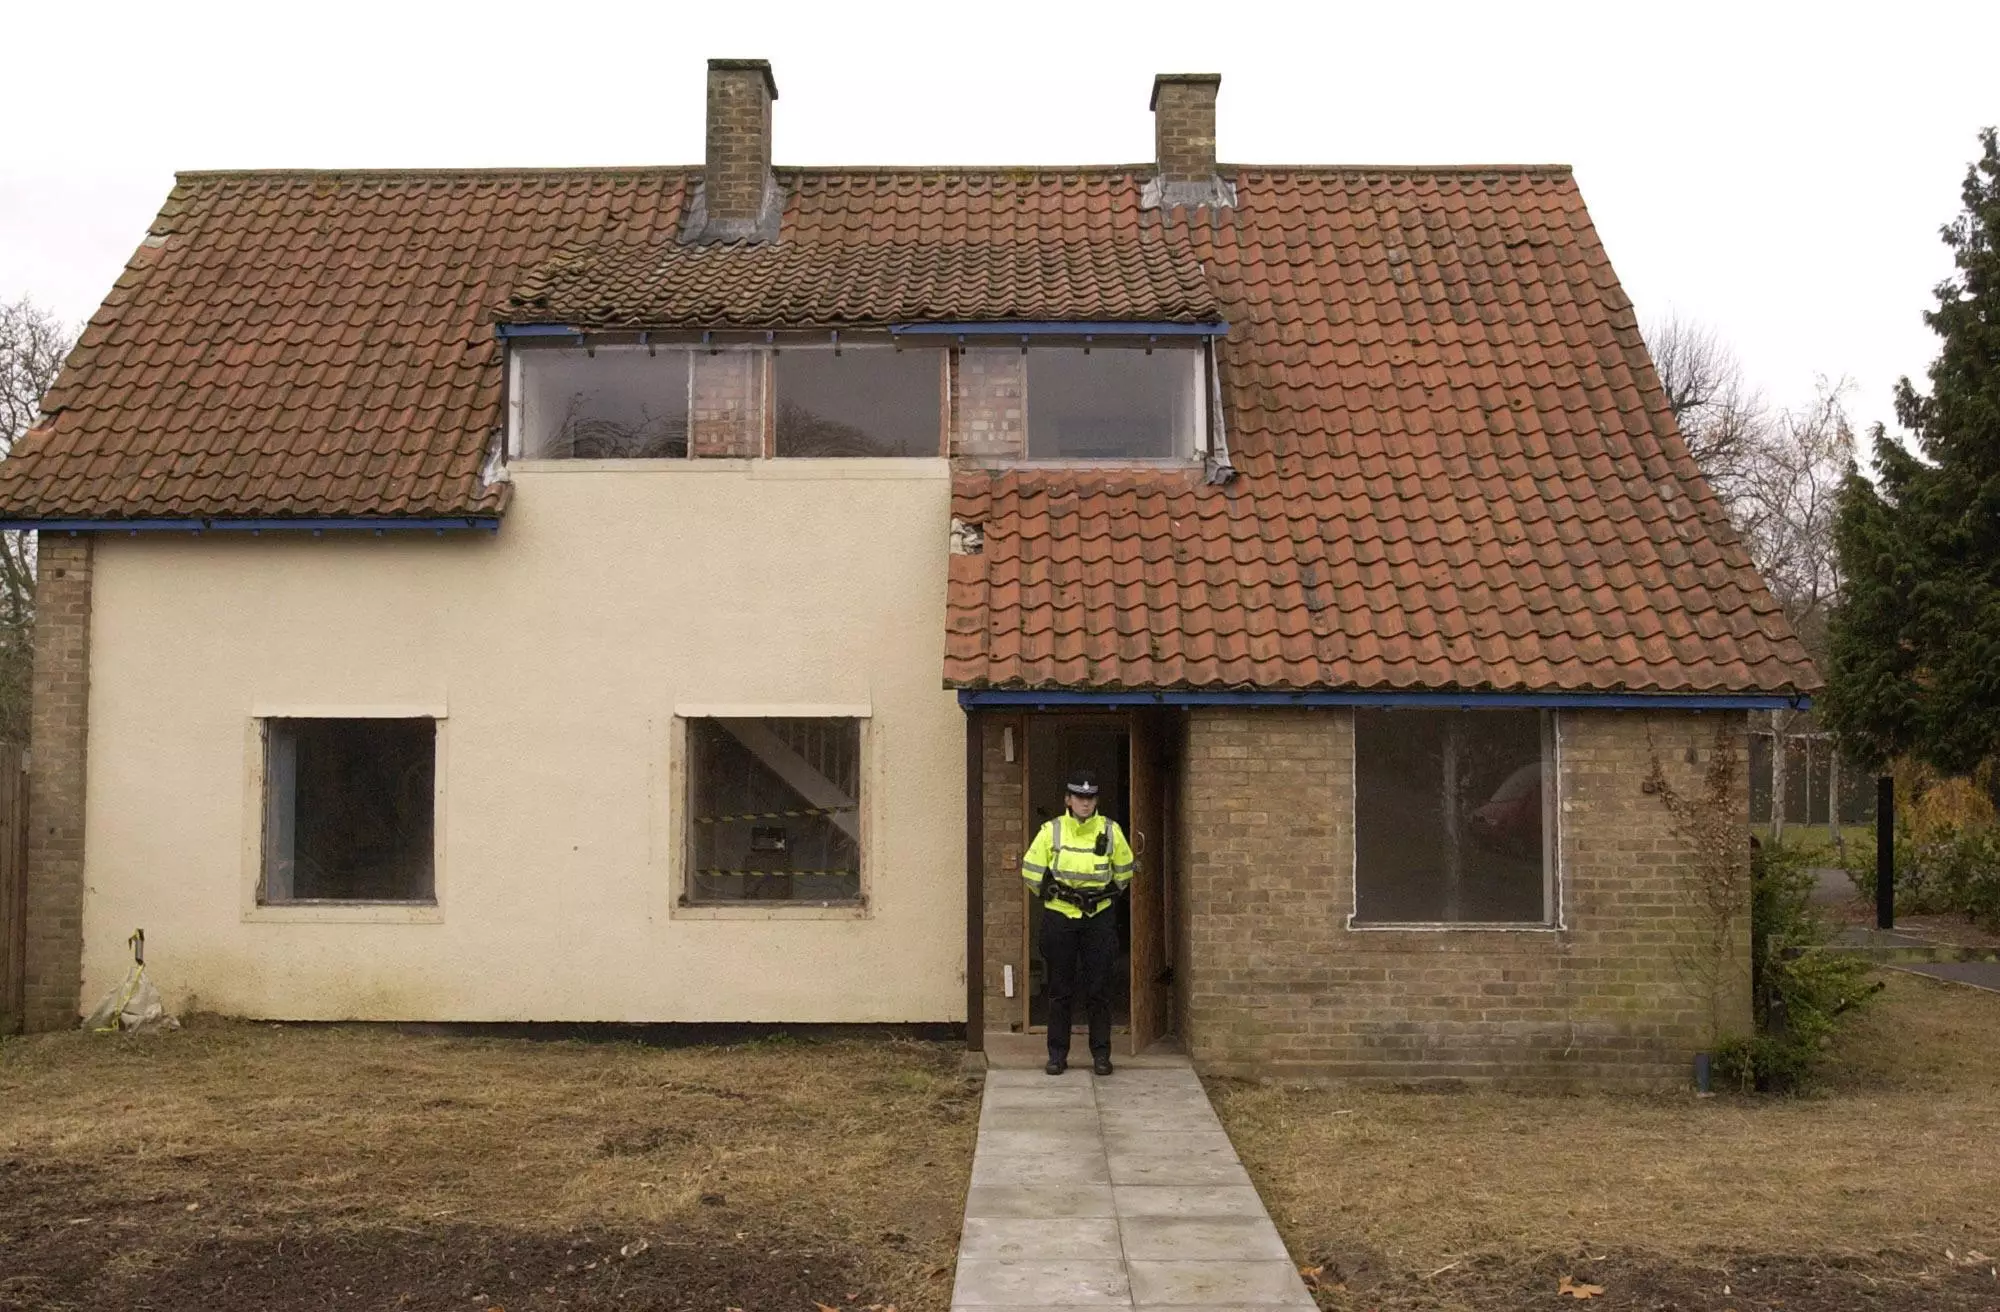 A police officer stands outside Ian Huntley's home.